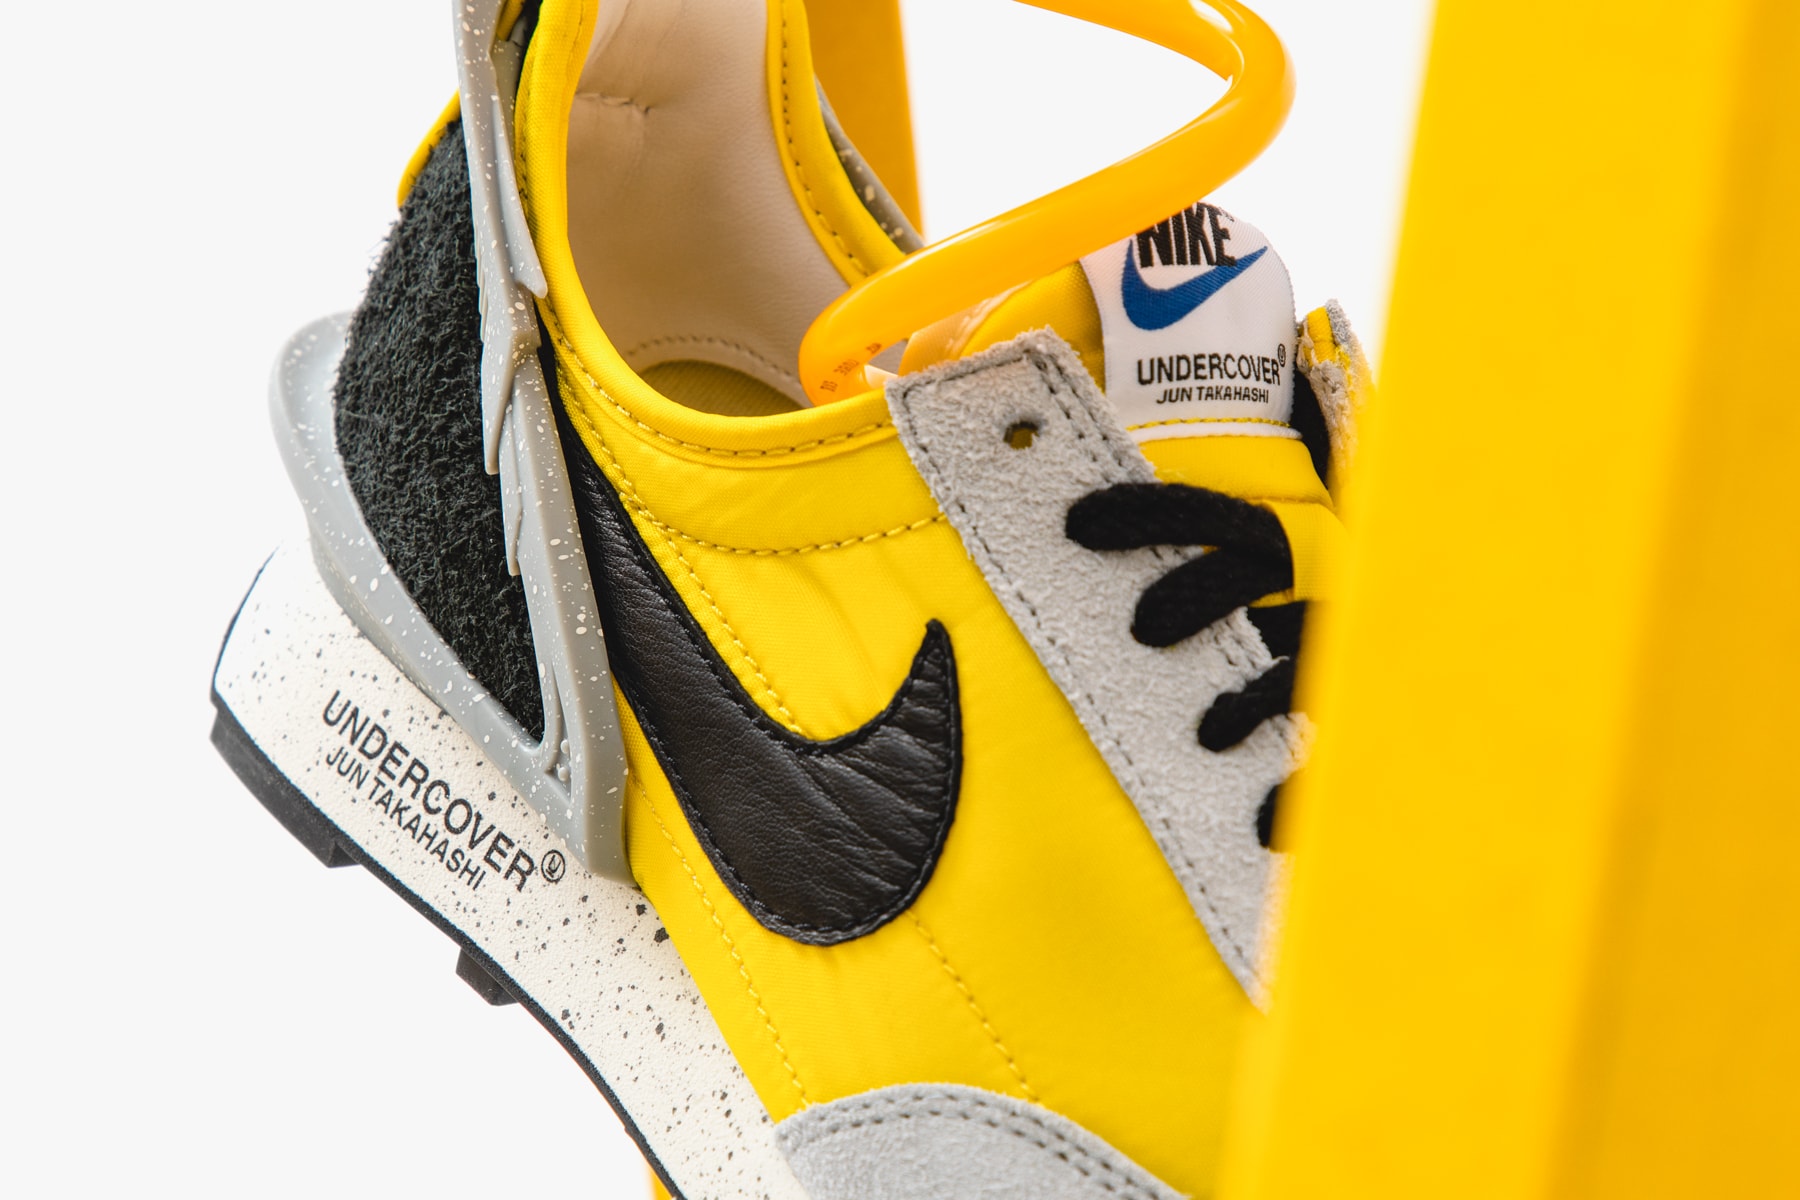 UNDERCOVER x Nike Daybreak "Yellow" Closer Look collaborations sneakers yellow bright citron black blue white release jun takahashi